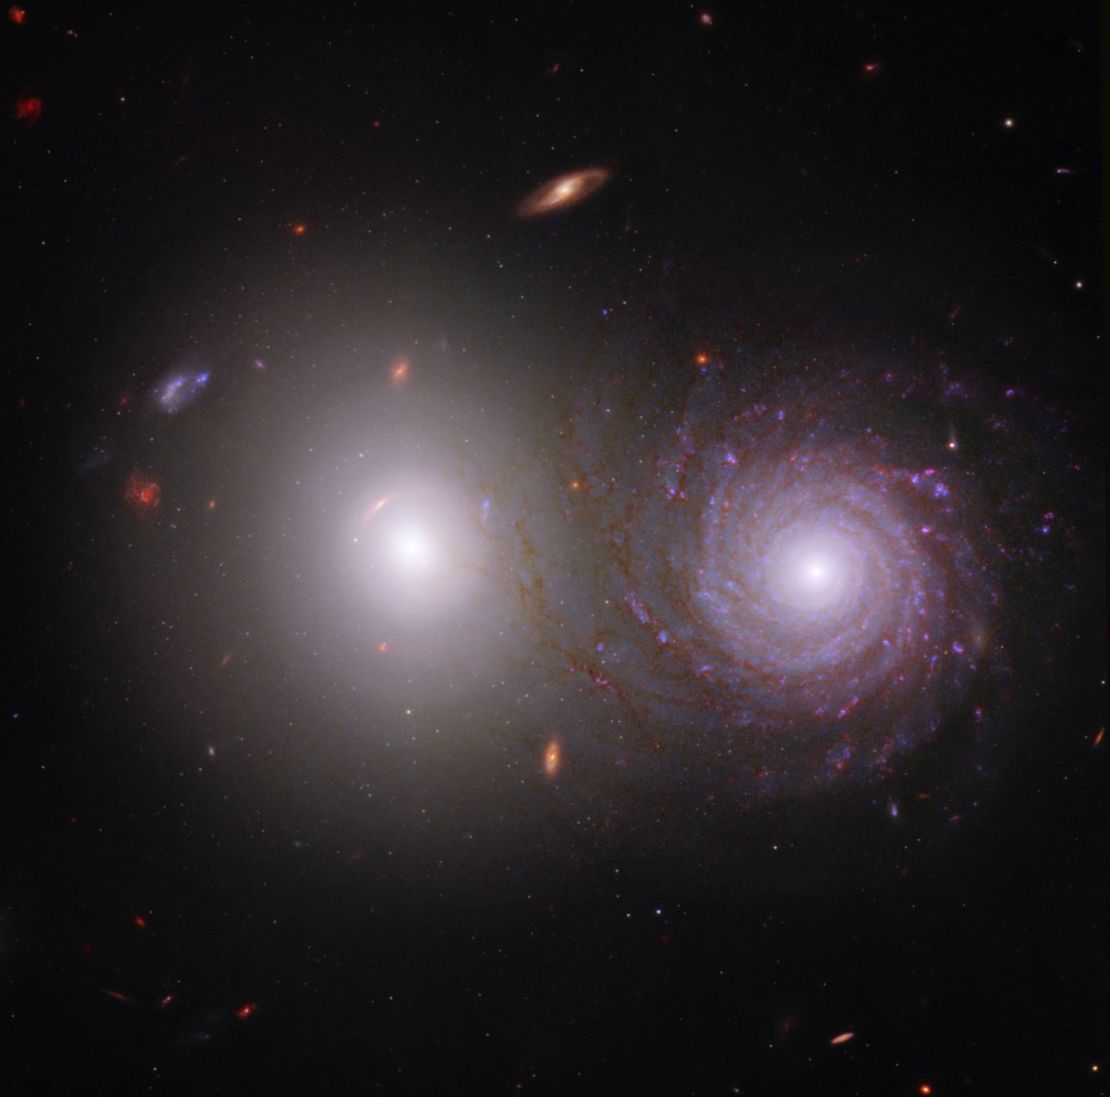 The James Webb Space Telescope and Hubble Space Telescope contributed to this image of galactic pair VV 191. Webb observed the brighter elliptical galaxy (left) and spiral galaxy (right) in near-infrared light, and Hubble collected data in visible and ultraviolet light.